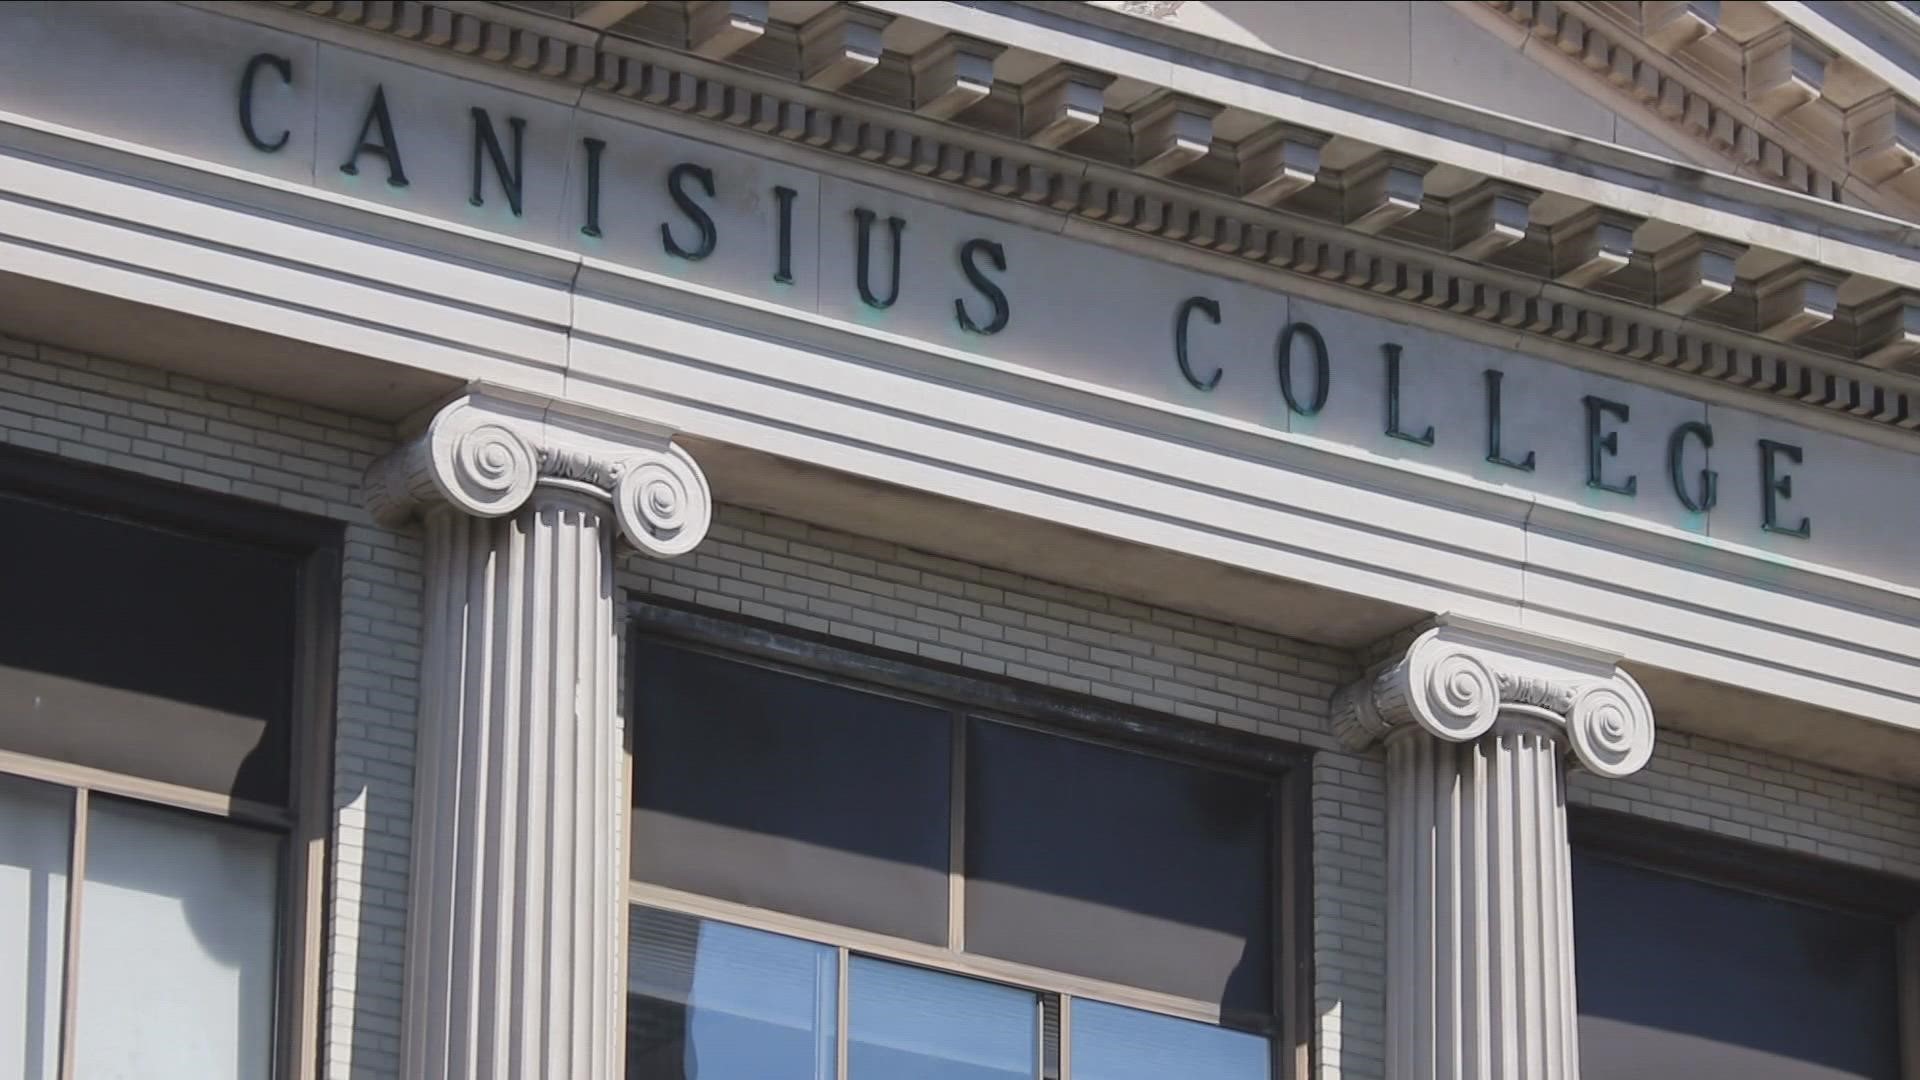 The blizzard caused extensive water damage inside of Lyons Hall at Canisius College in Buffalo.  Also, several buildings have electrical, plumbing and other damage.